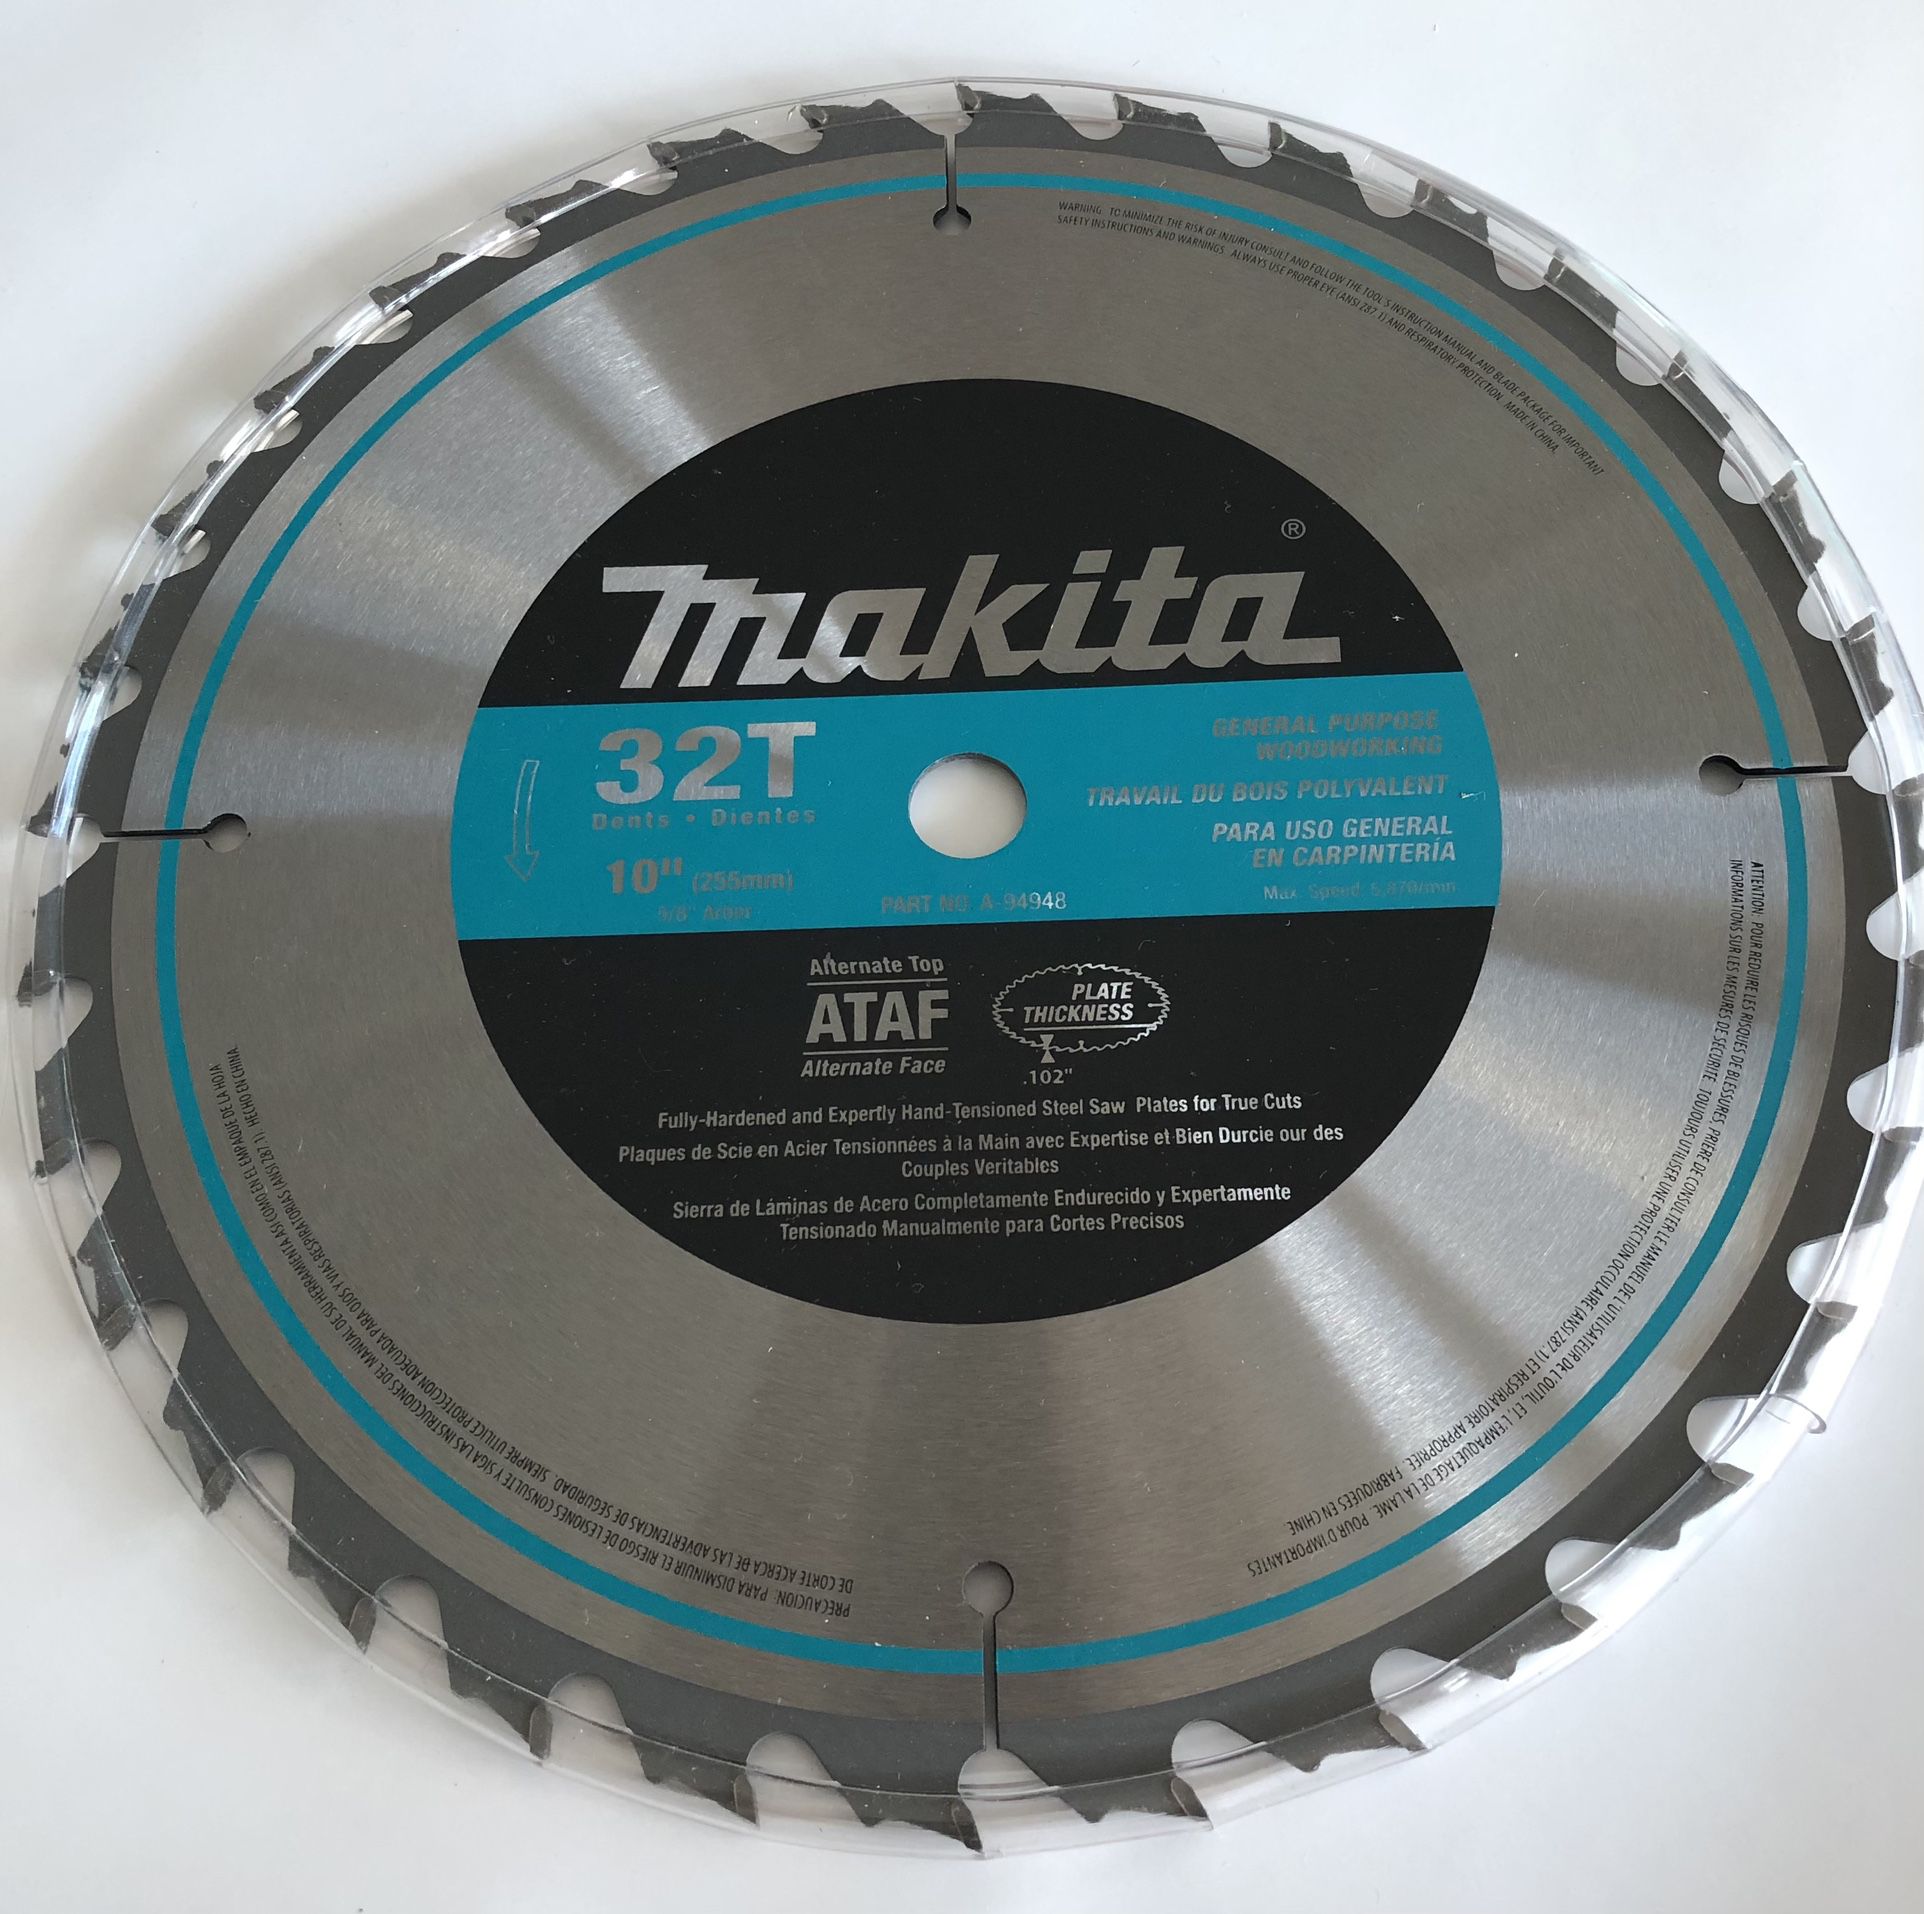 NEW 10 in Inch 32-Teeth Tooth Carbide-Tipped Table Saw Blade Mitre Miter Chop 